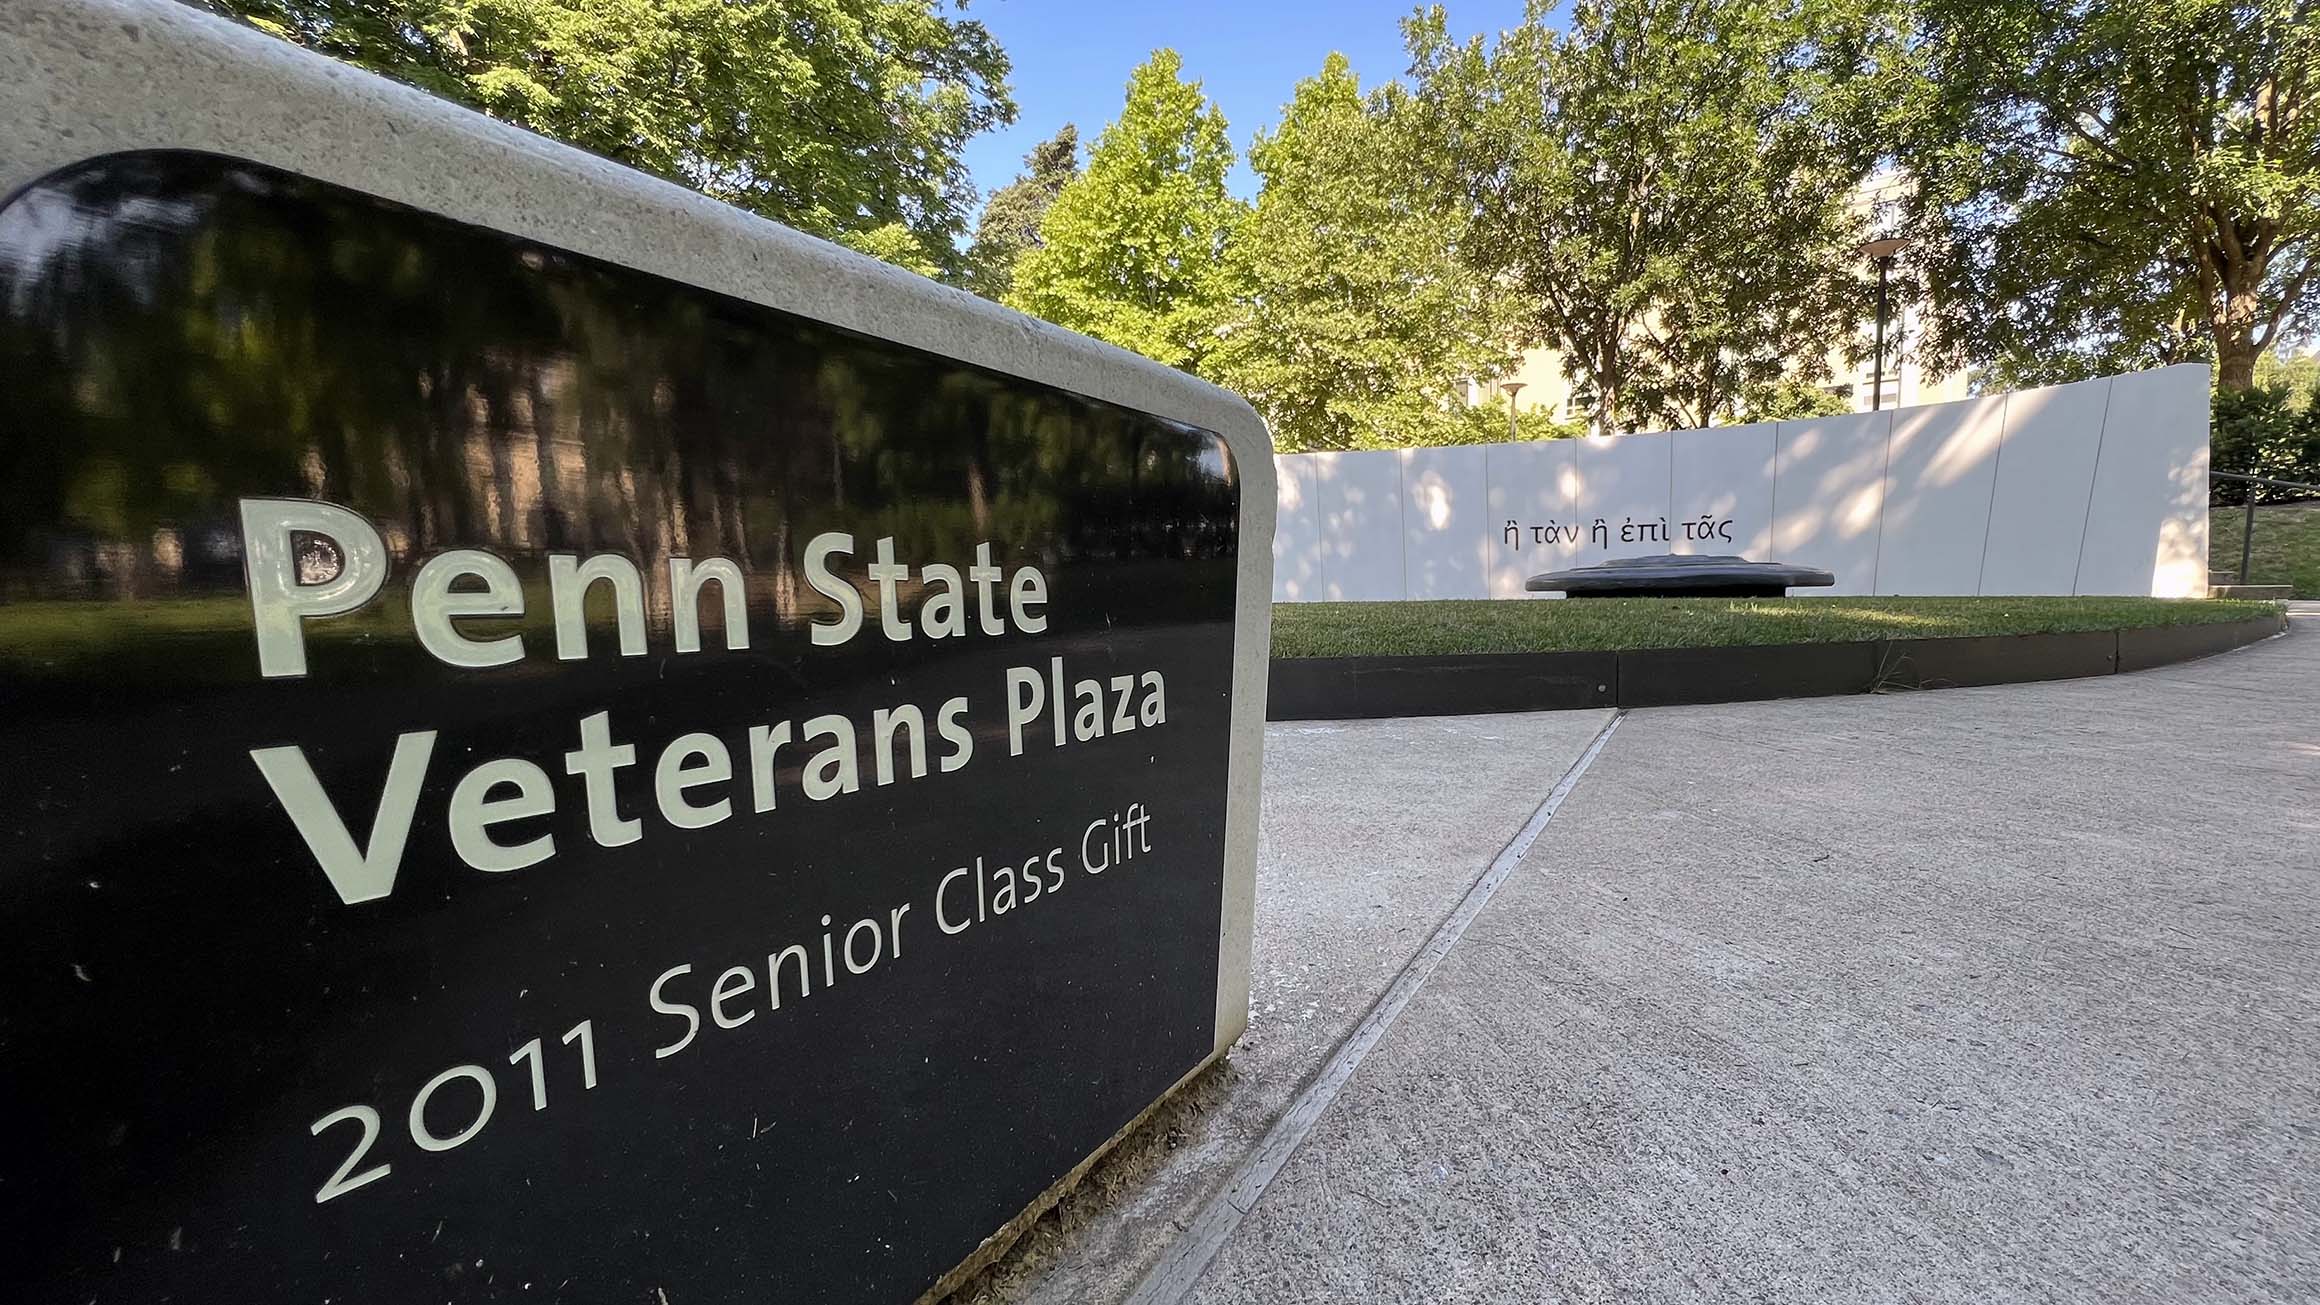 A sign reading Penn State Veterans Plaza, 2011 senior class gift in the foreground with the plaza in the background